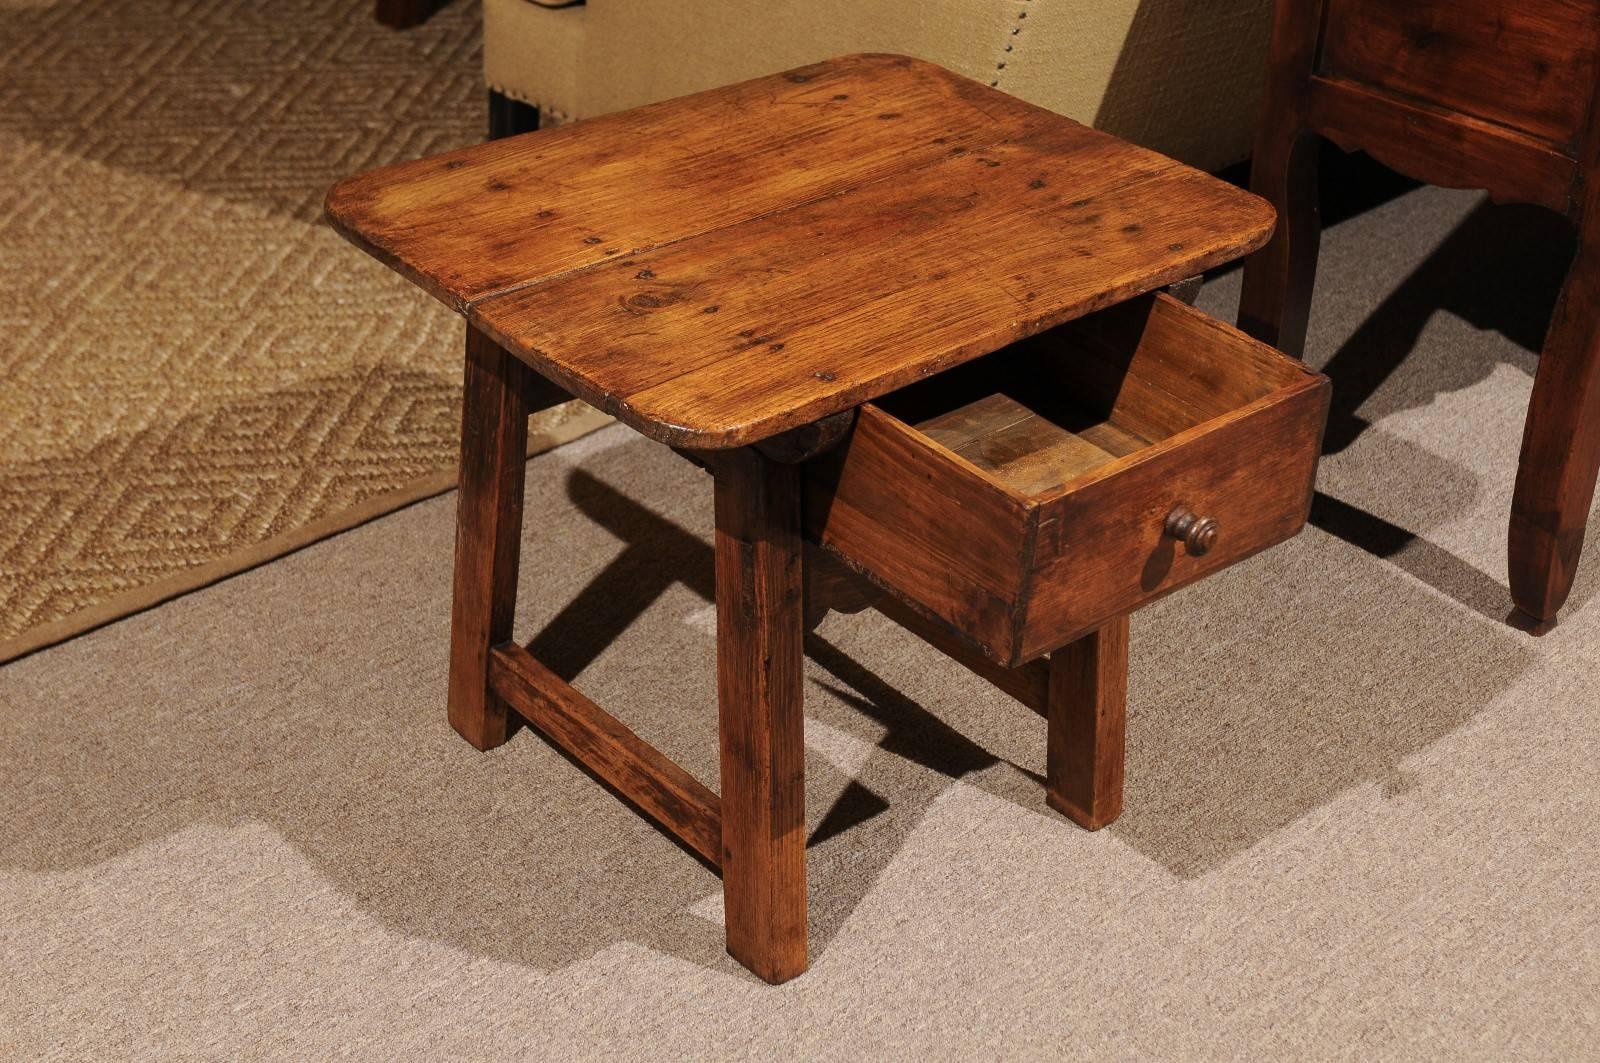 Hand-Crafted 19th Century Pine Shepherds Table from Spain